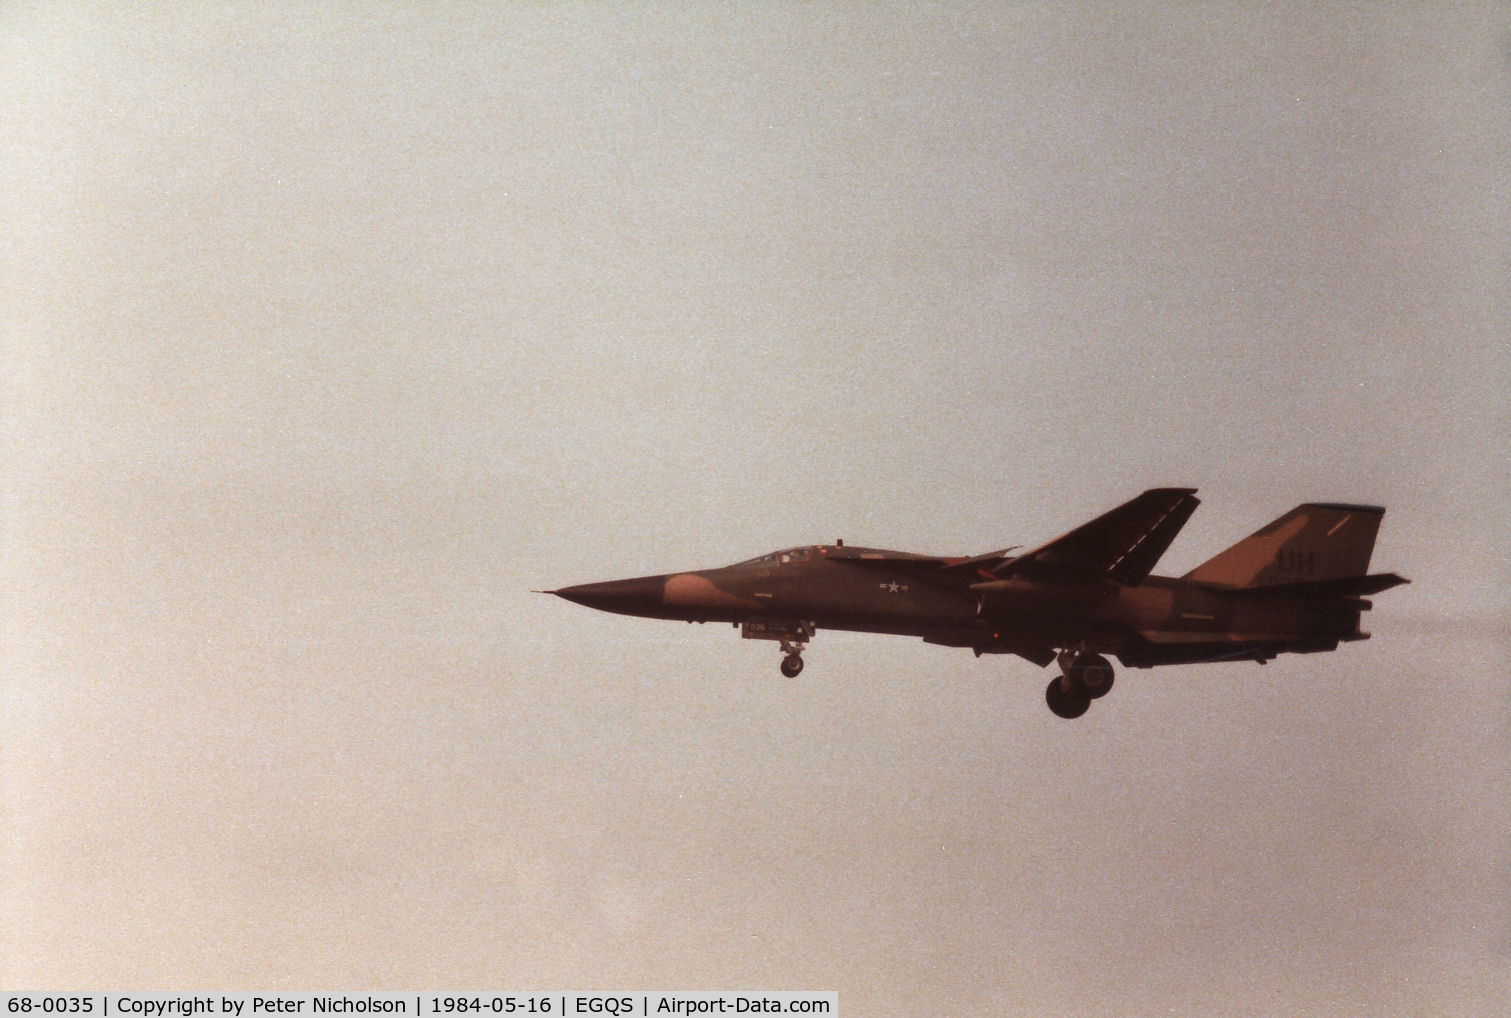 68-0035, 1968 General Dynamics F-111E Aardvark C/N A1-204, F-111E  of the 55th Tactical Fighter Squadron/20th Tactical Fighter Wing at RAF Upper Heyford on a practice approach to RAF Lossiemouth in May 1984.